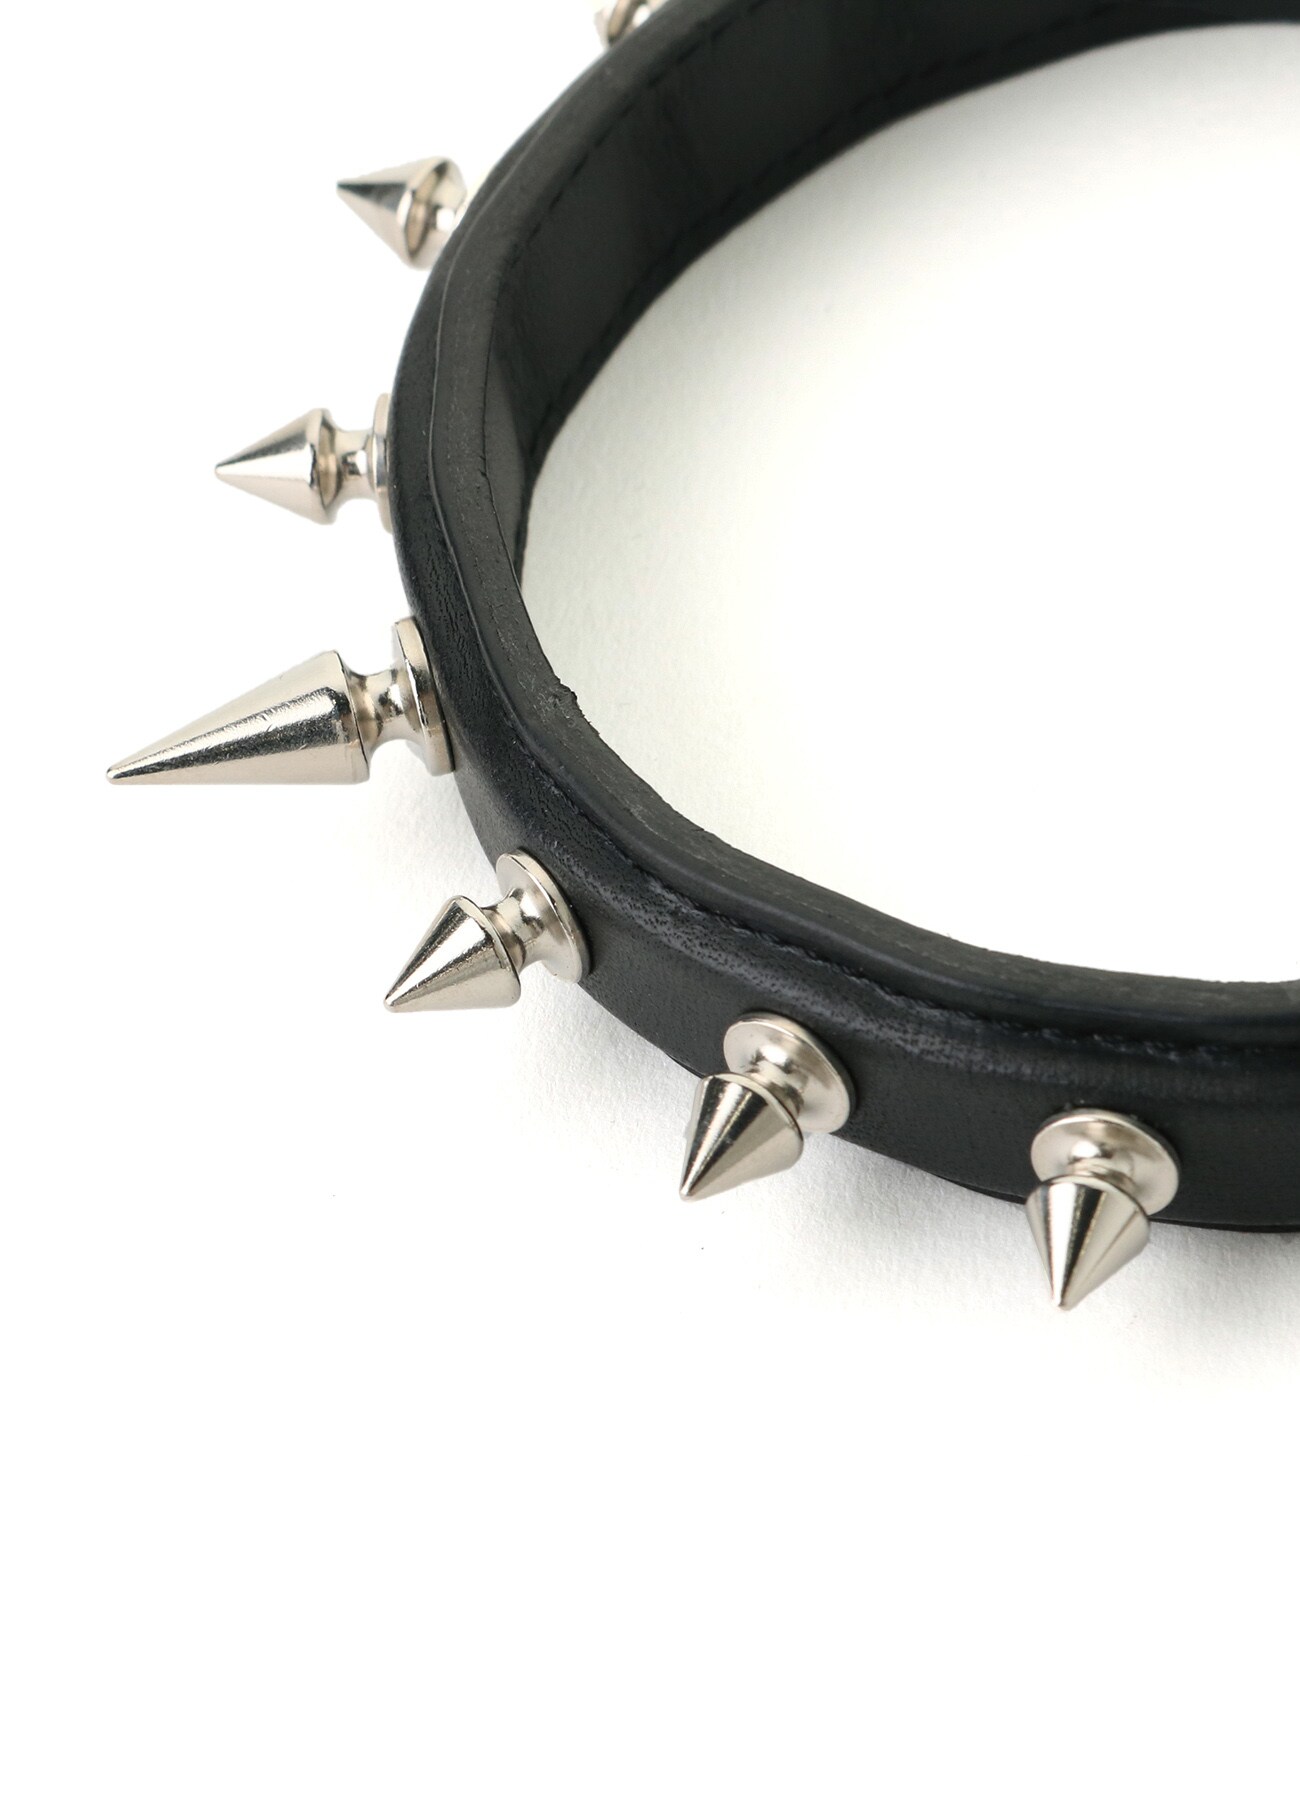 Tanned Leather London Studs Choker